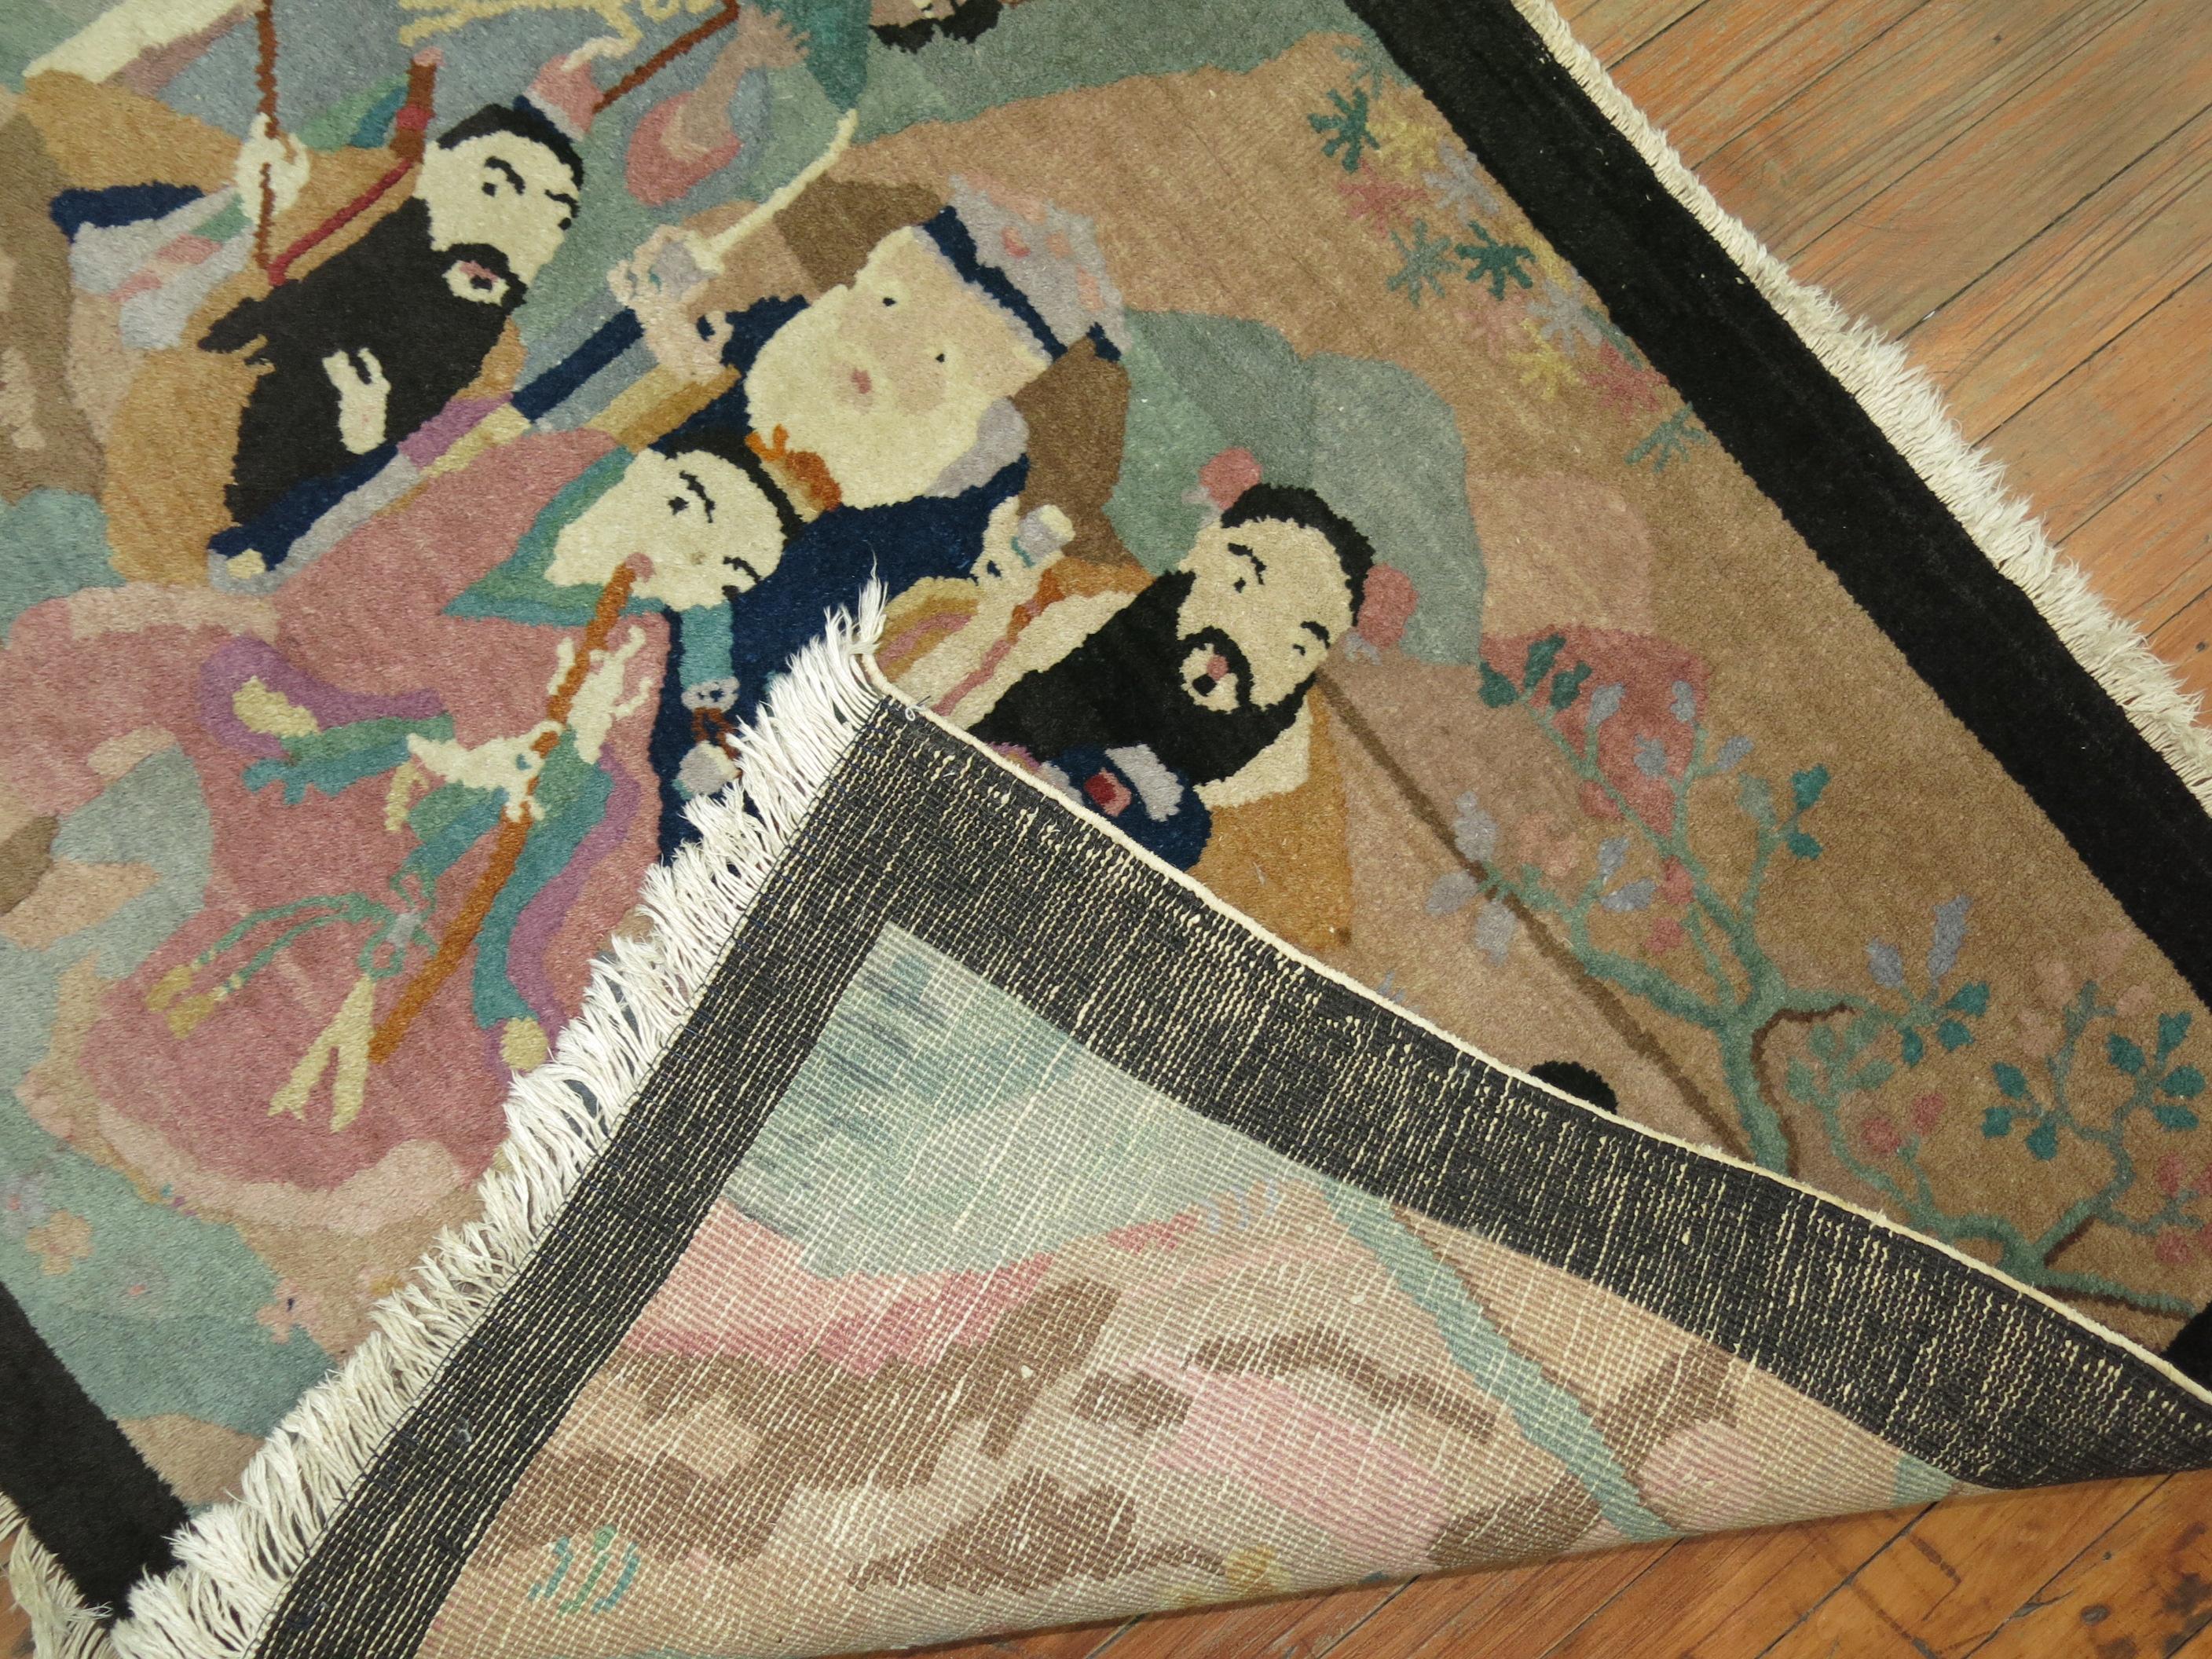 A one of a kind mid-20th century Chinese Pictorial Rug.